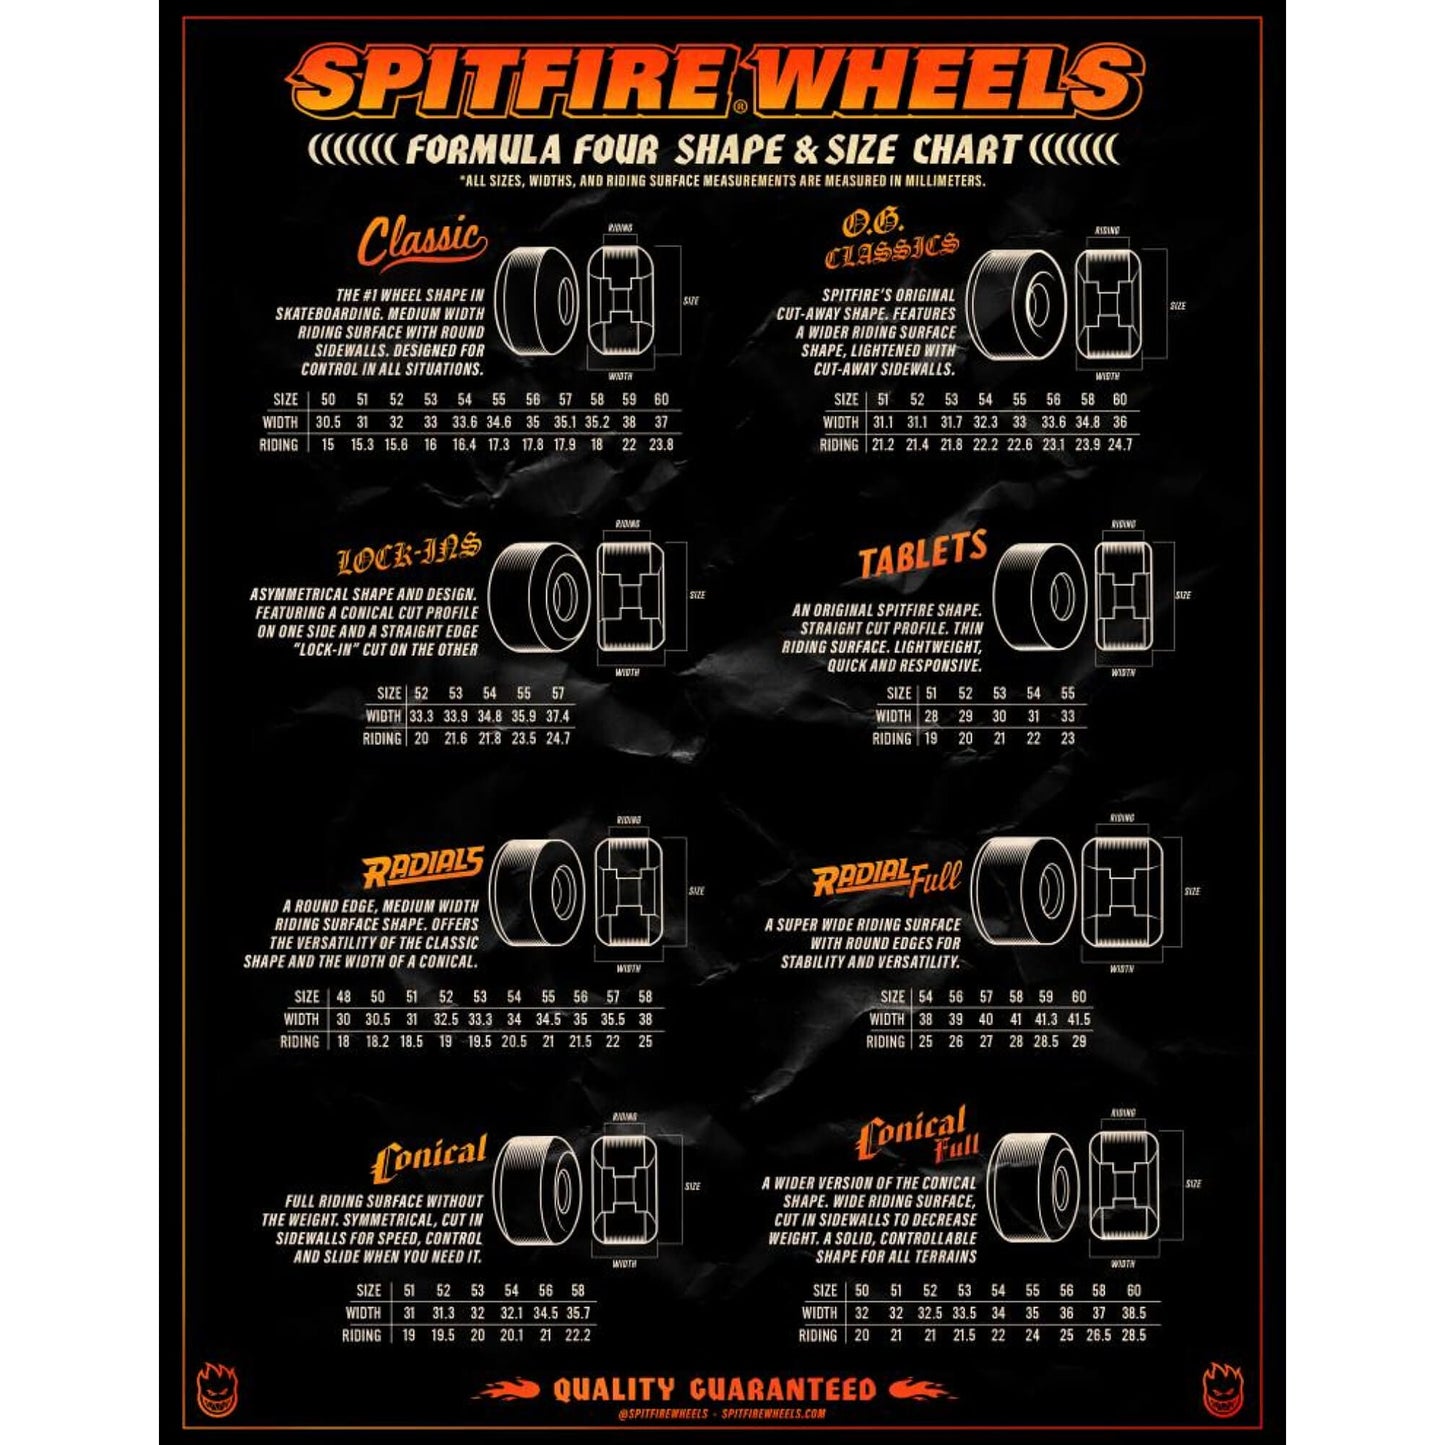 Spitfire | 56mm/101a F4 Conical Full Wheels